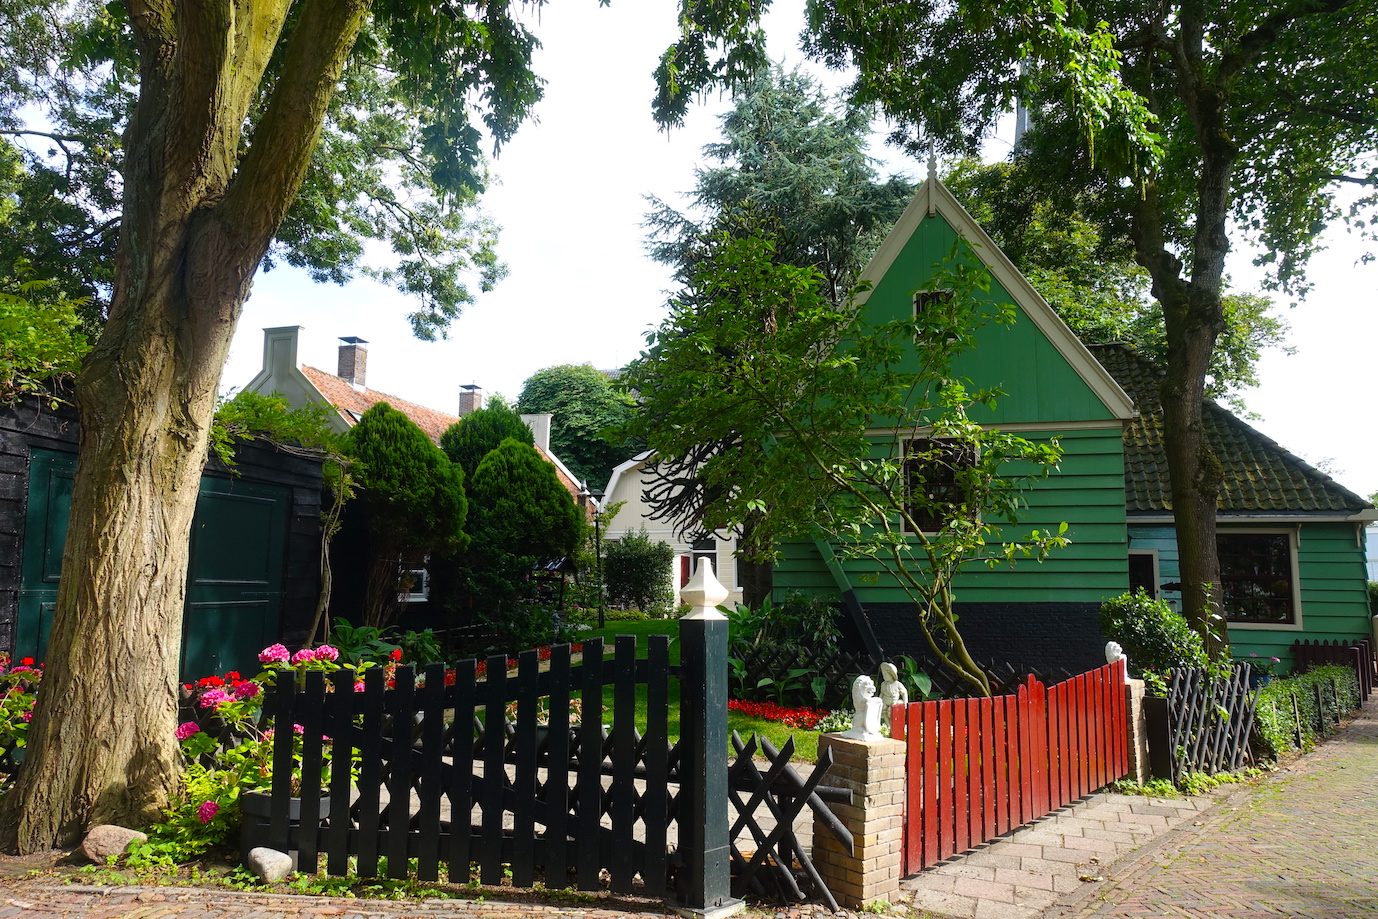 Green wooden house with red and black fence and a tree in Broek in Waterland